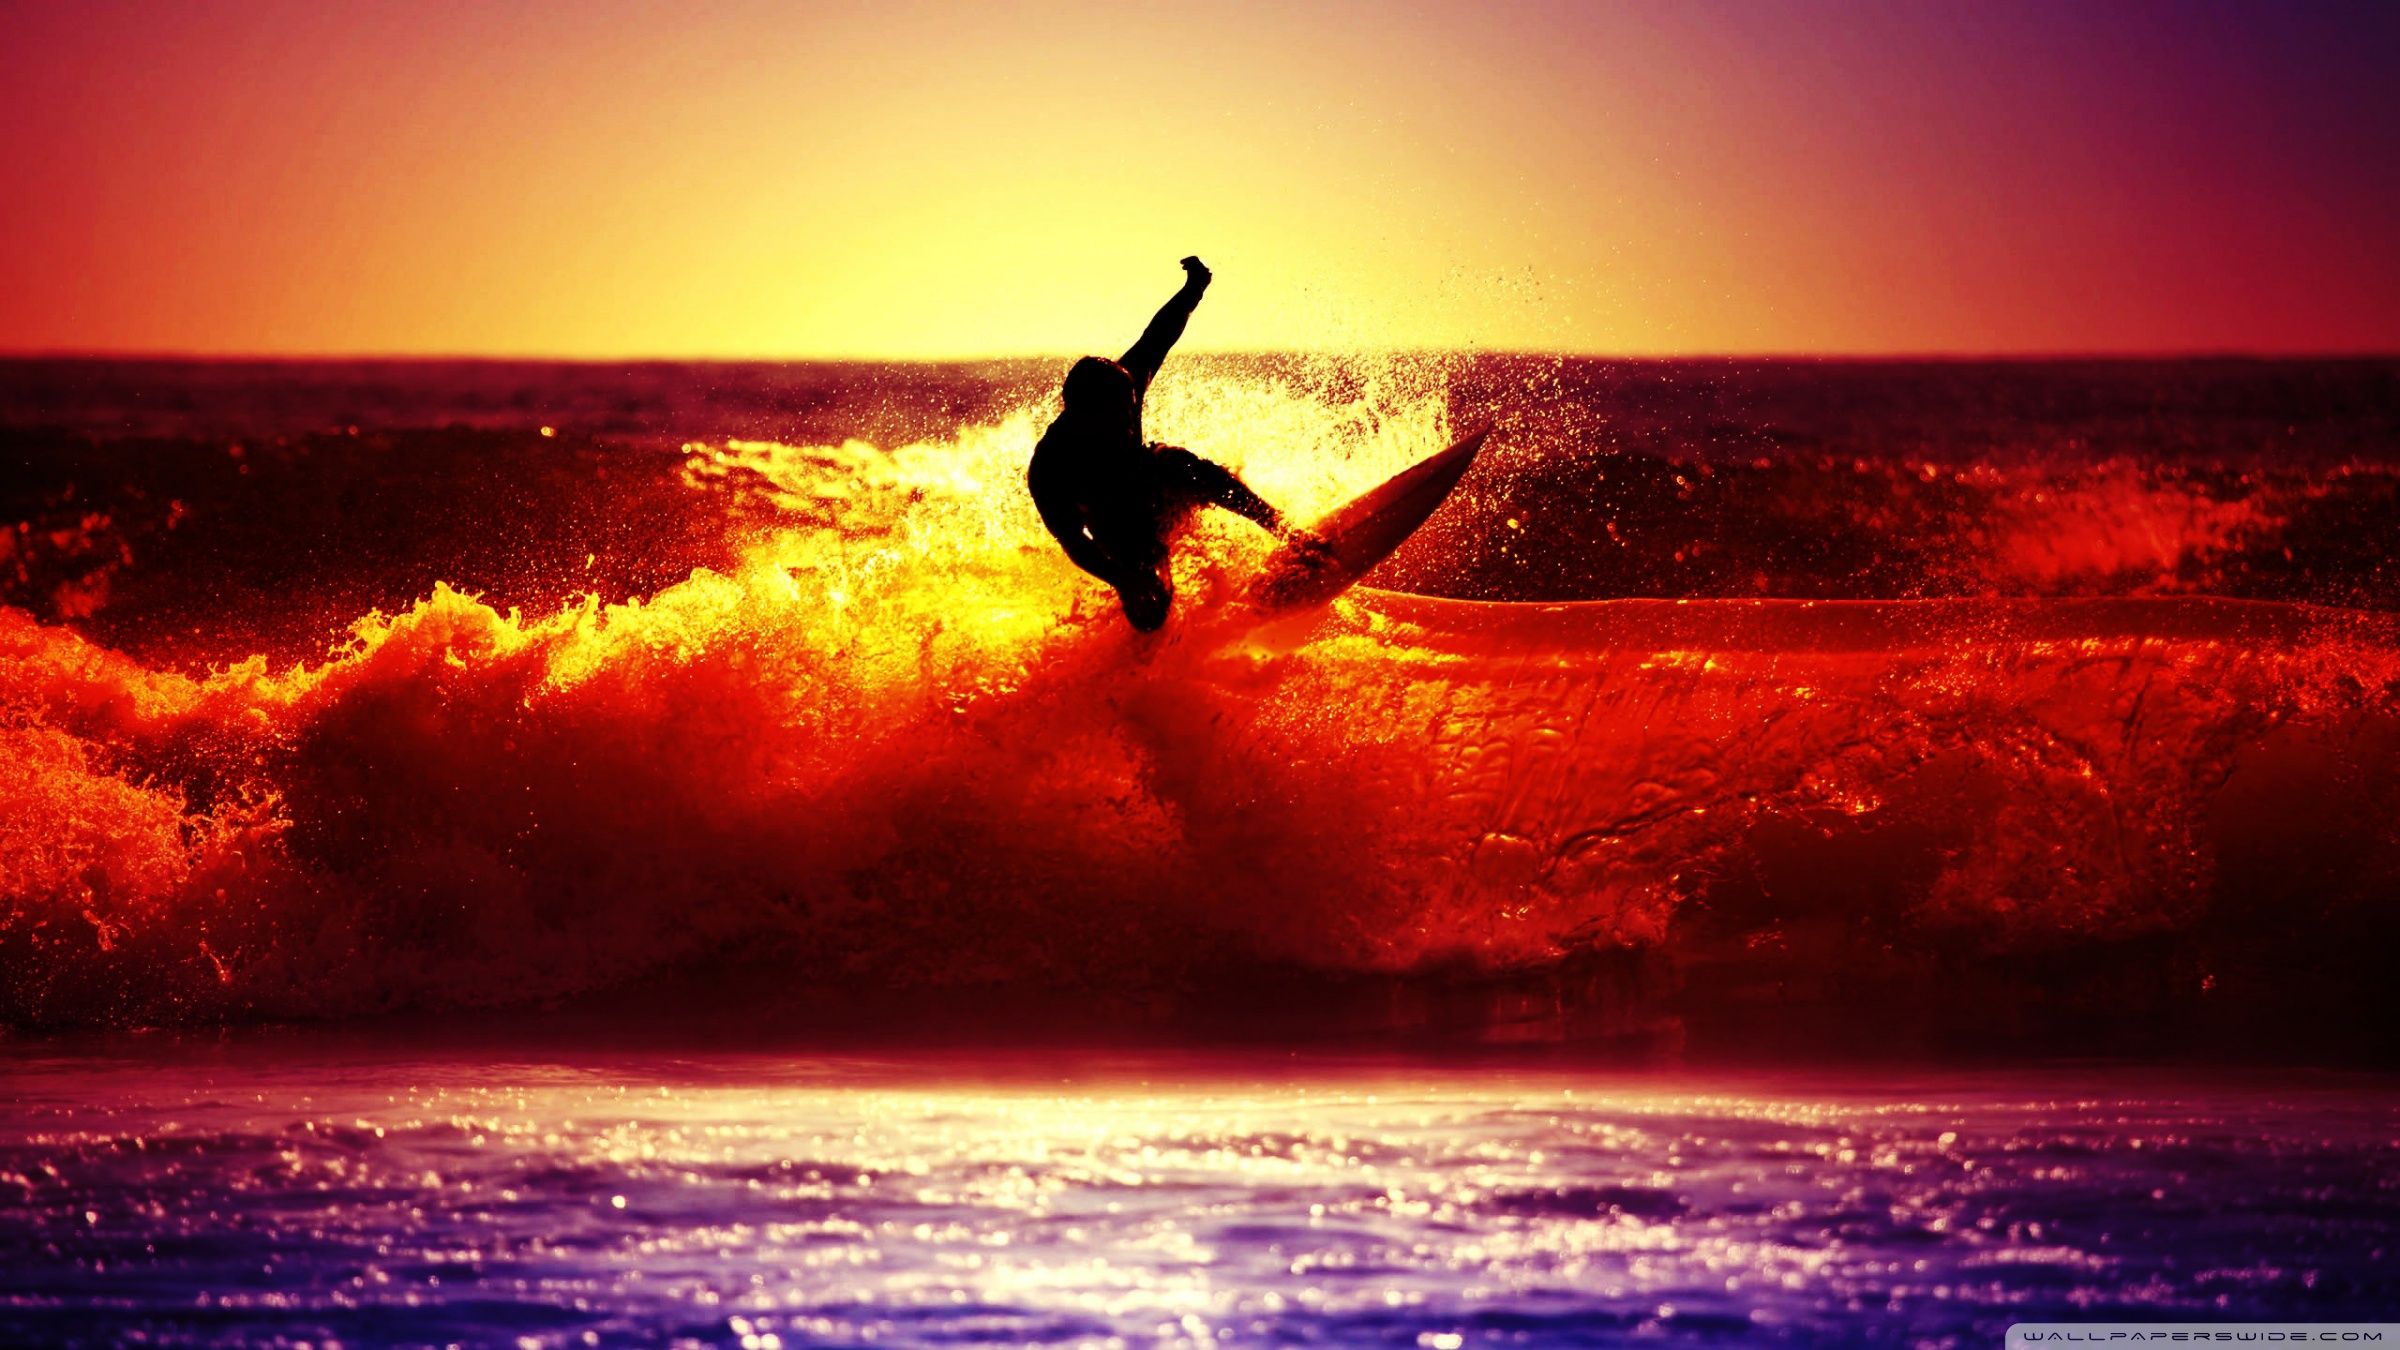 Surfing Ultra HD Desktop Background Wallpaper for: Multi Display, Dual Monitor, Tablet